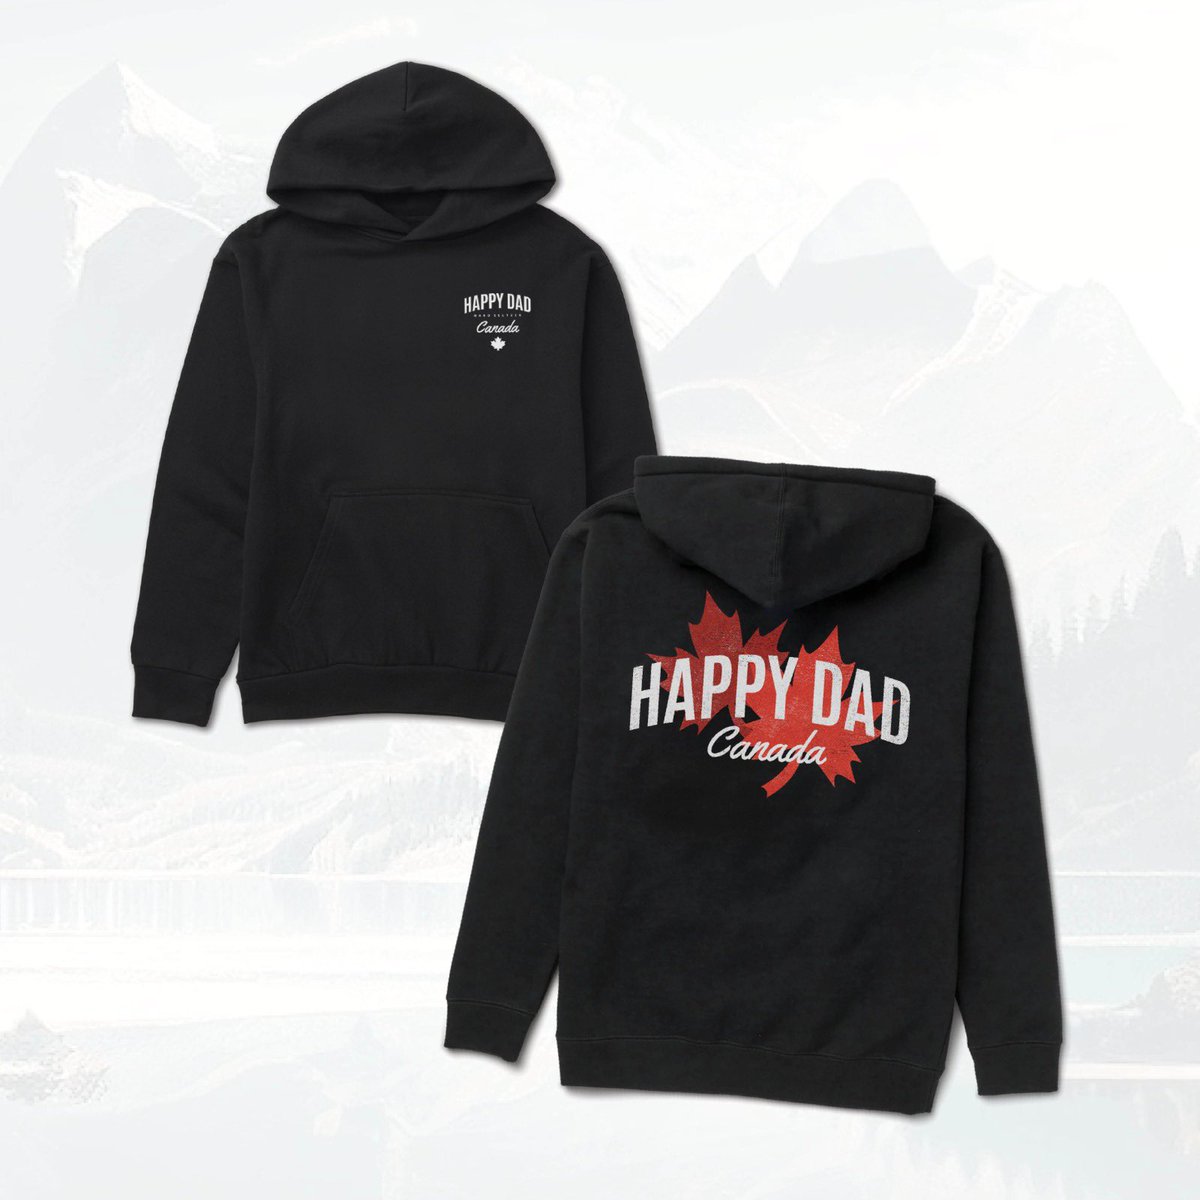 This one is for you, Canada 🇨🇦 Now available on happydad.com! (no duties on select items!)